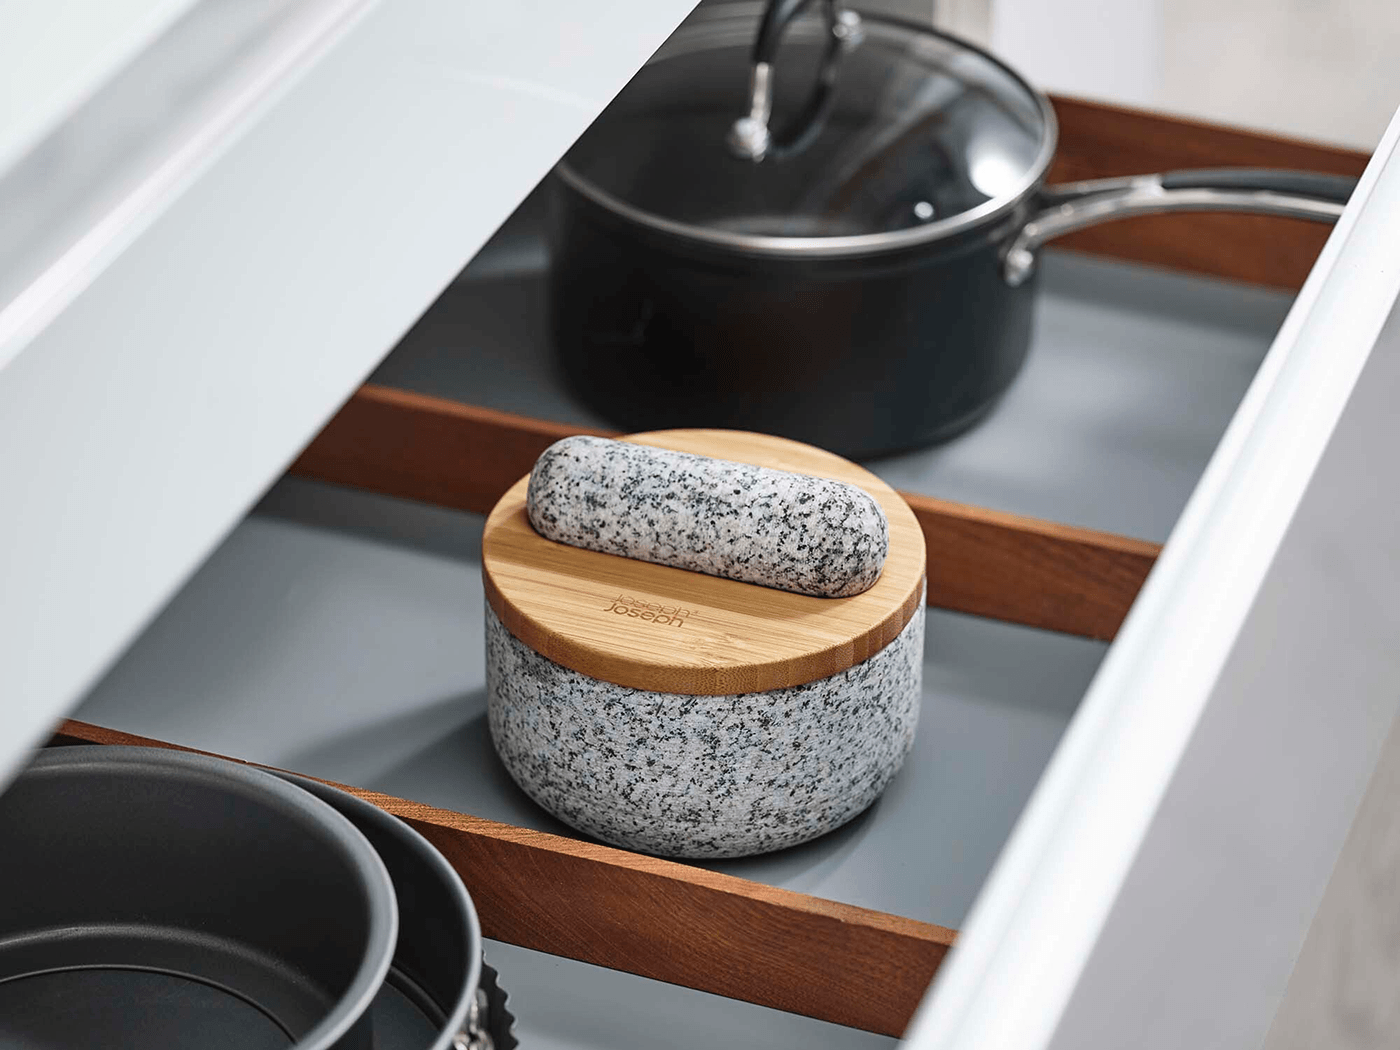 homeware kitchen cooking Food  KITCHENWARE Product Photography industrial design  design product design  Pestle & Mortar